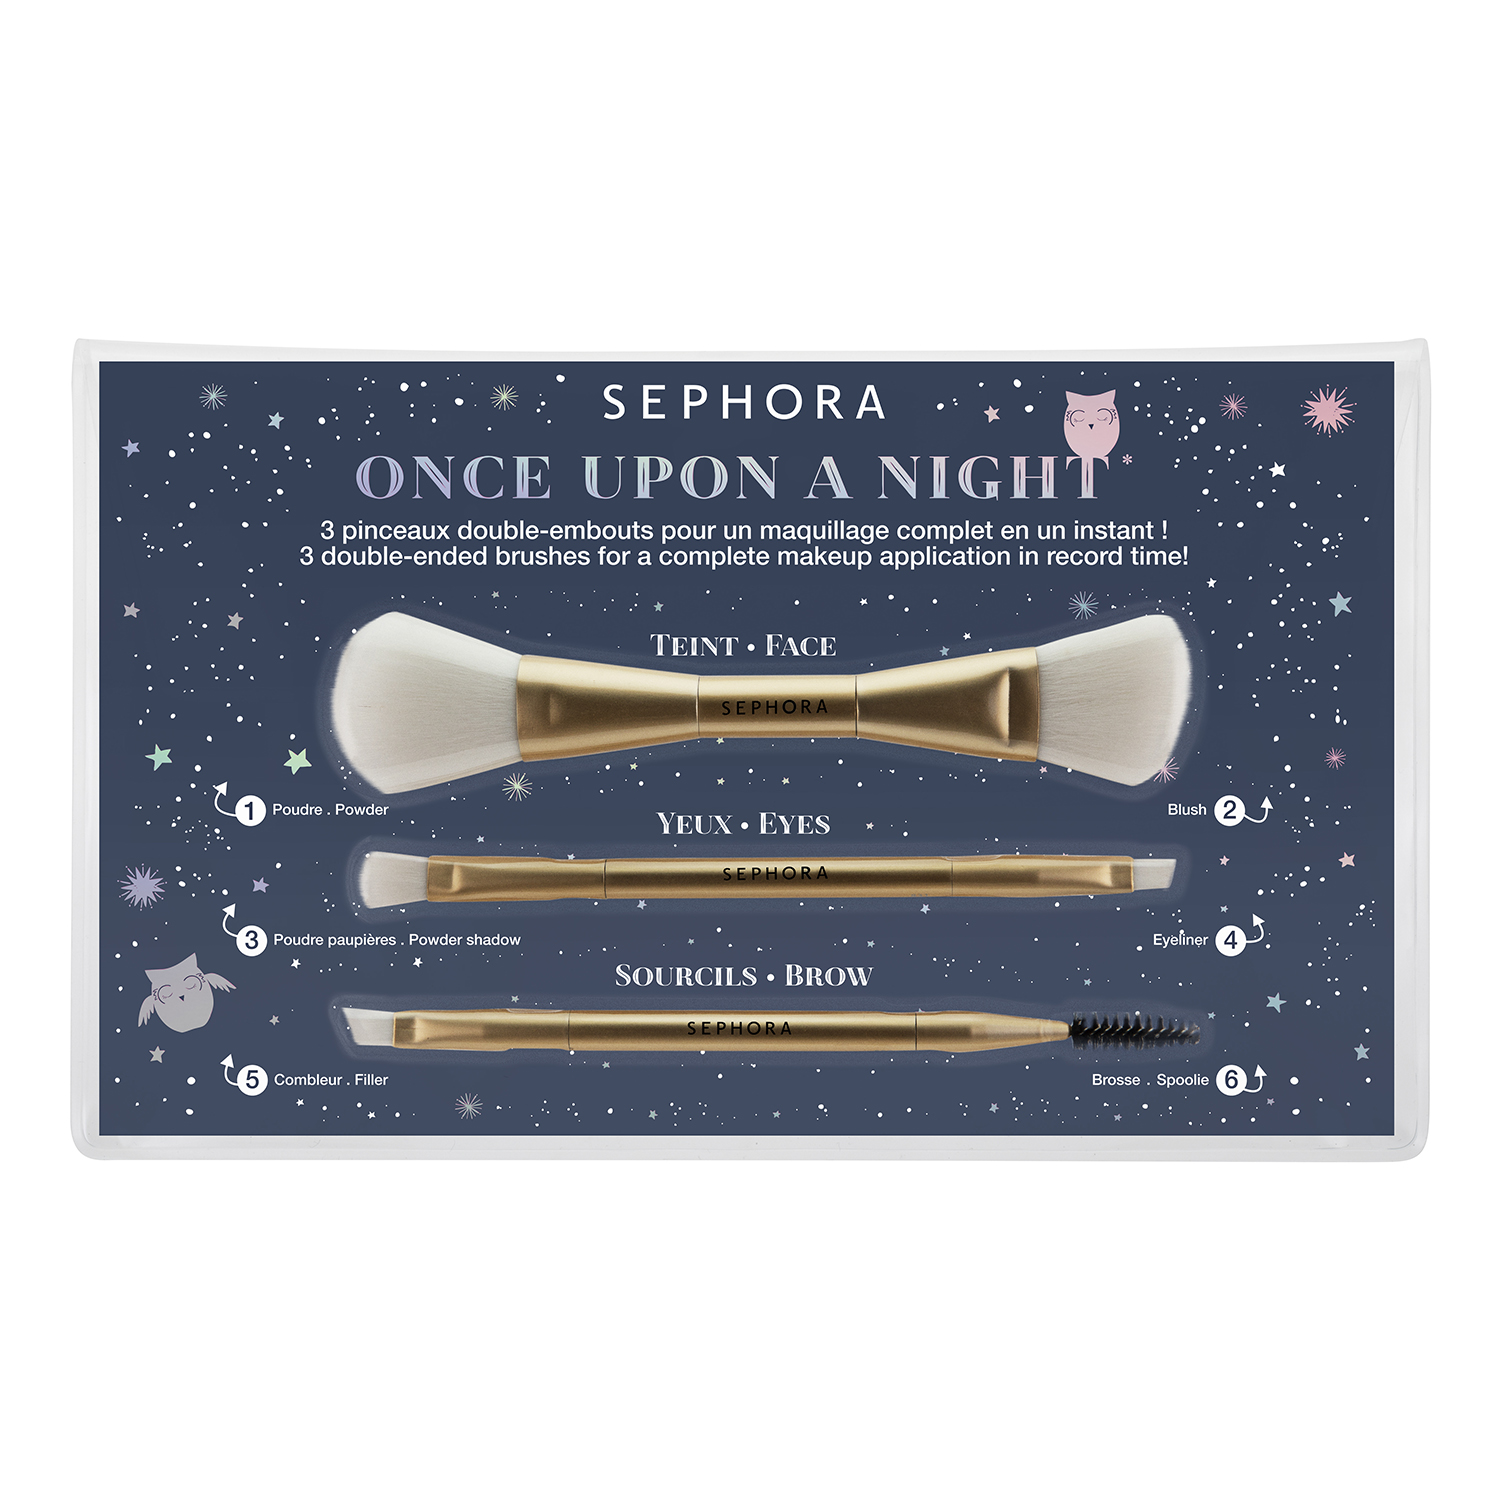 ONCE UPON A NIGHT SEPHORA PRIX 17,99€